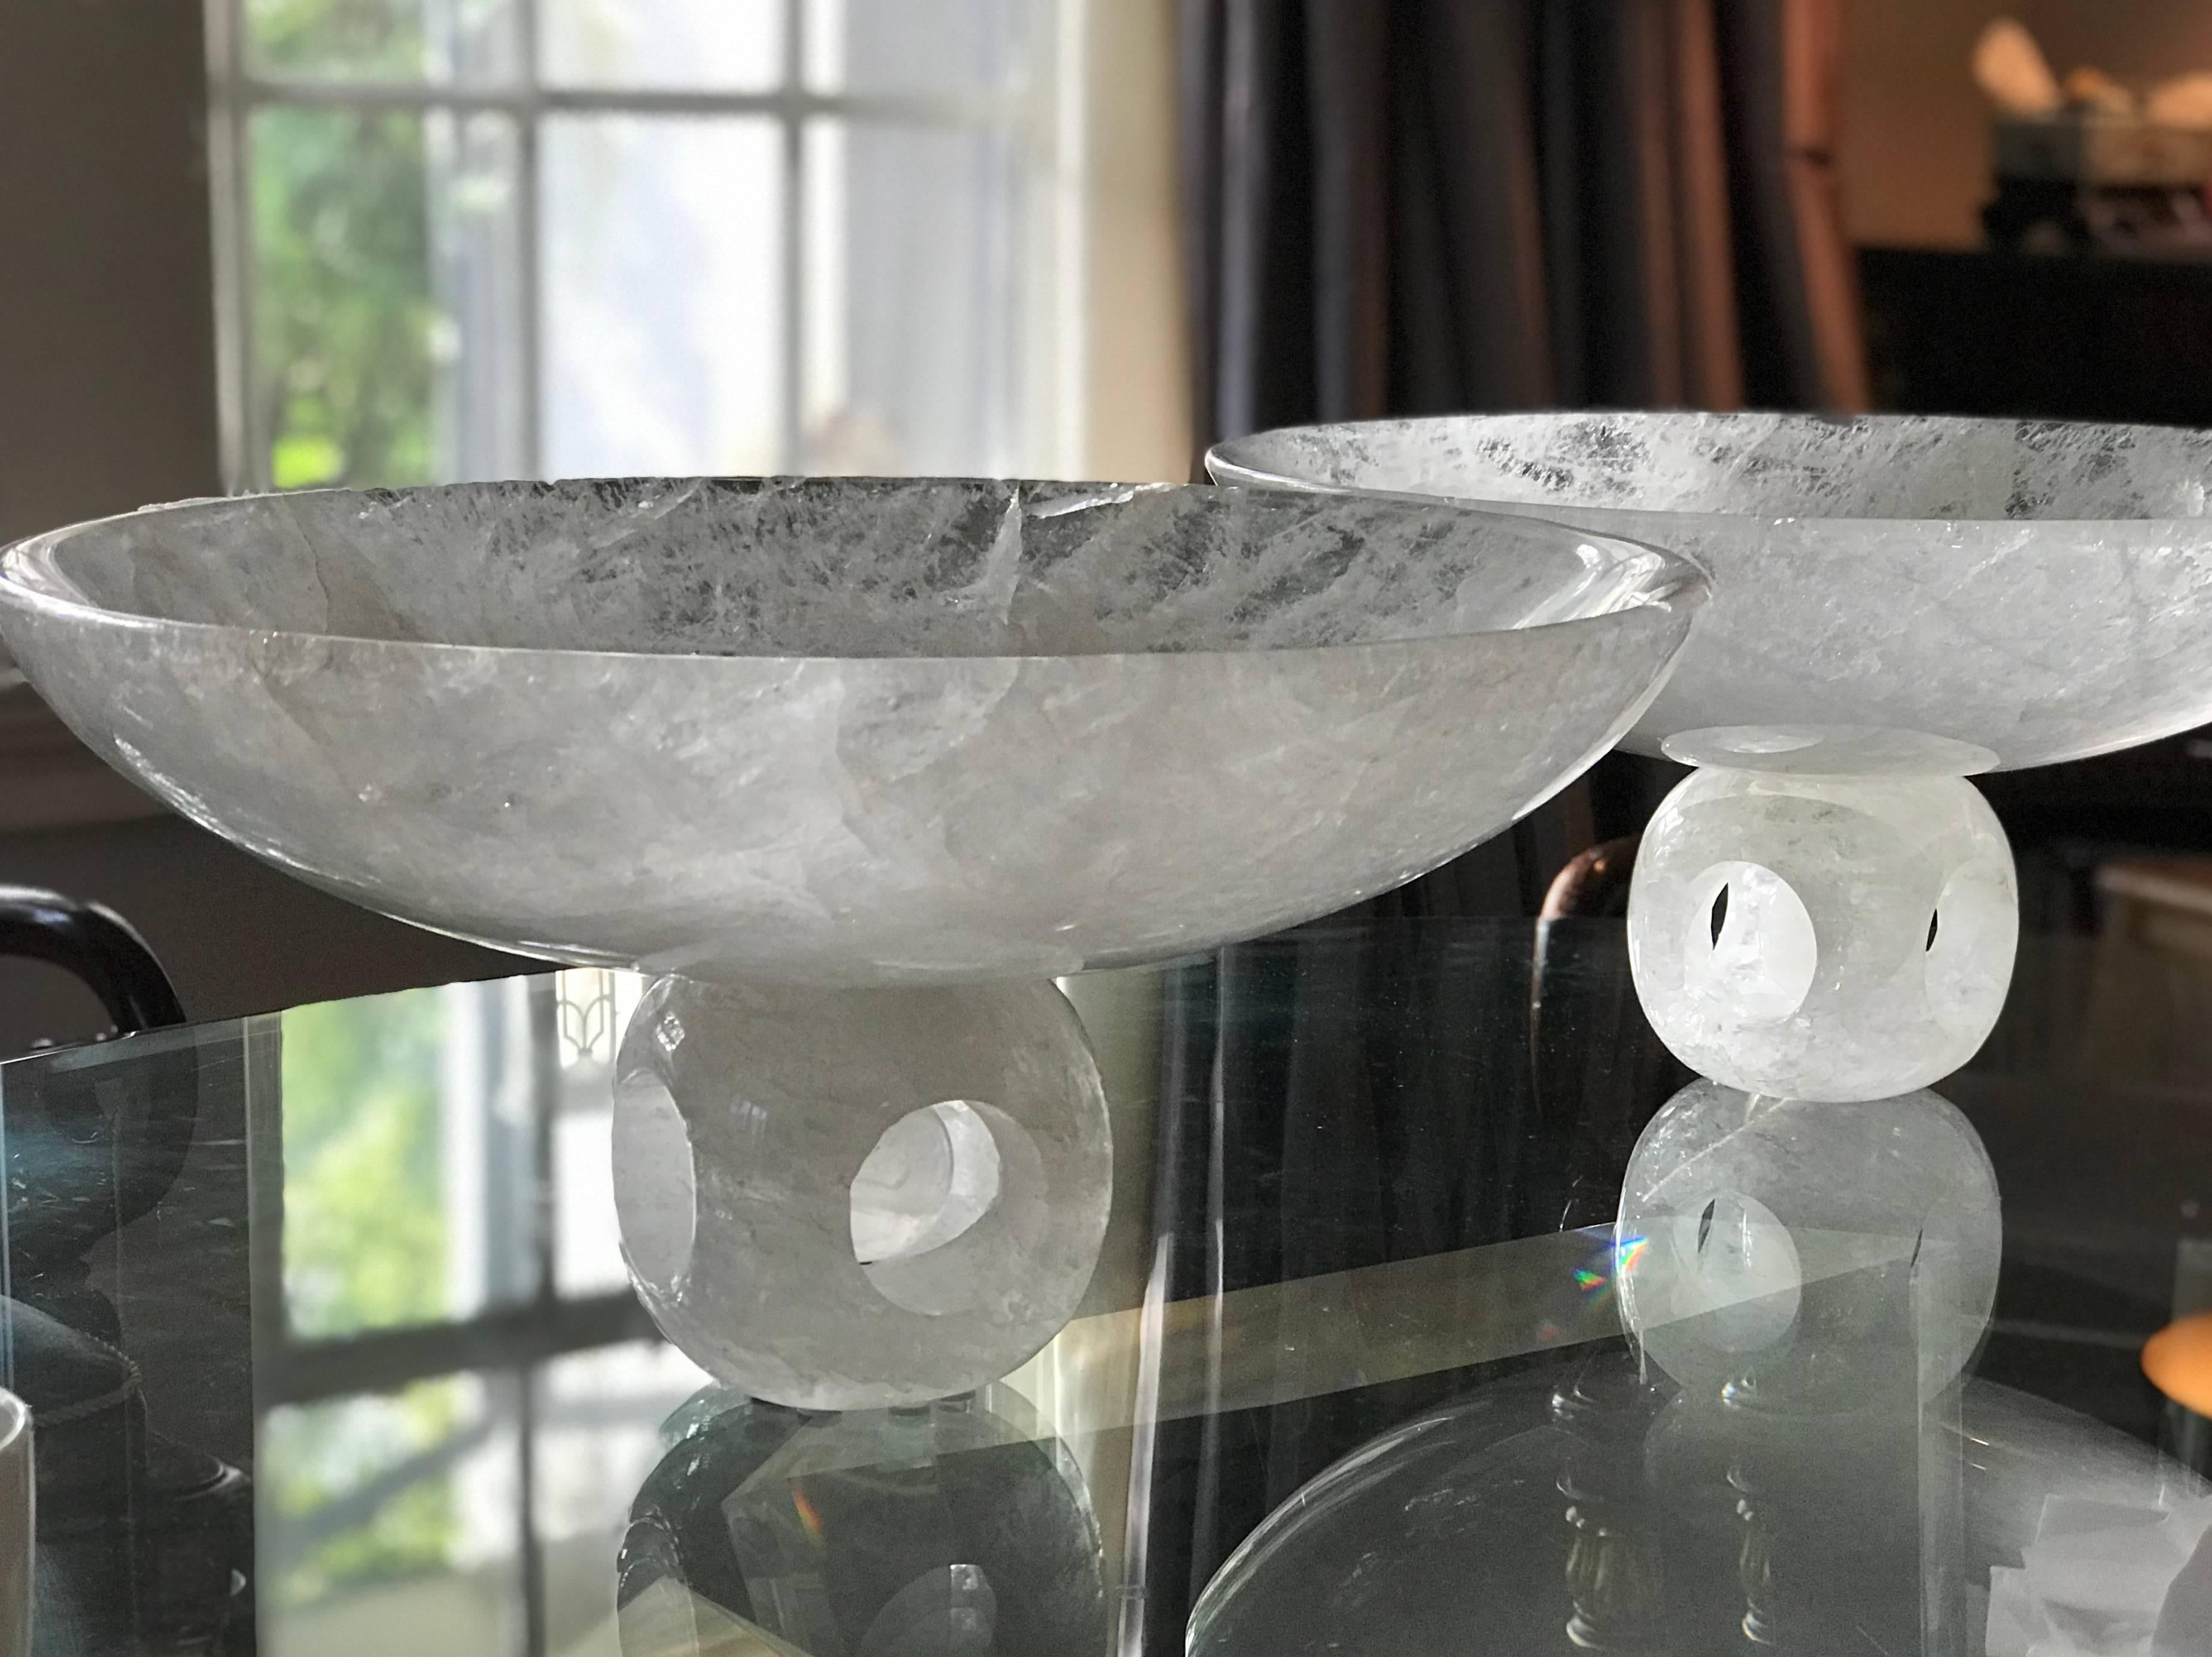 Large rock crystal bowl on a hollow cube base with rock crystal ball decorated.
